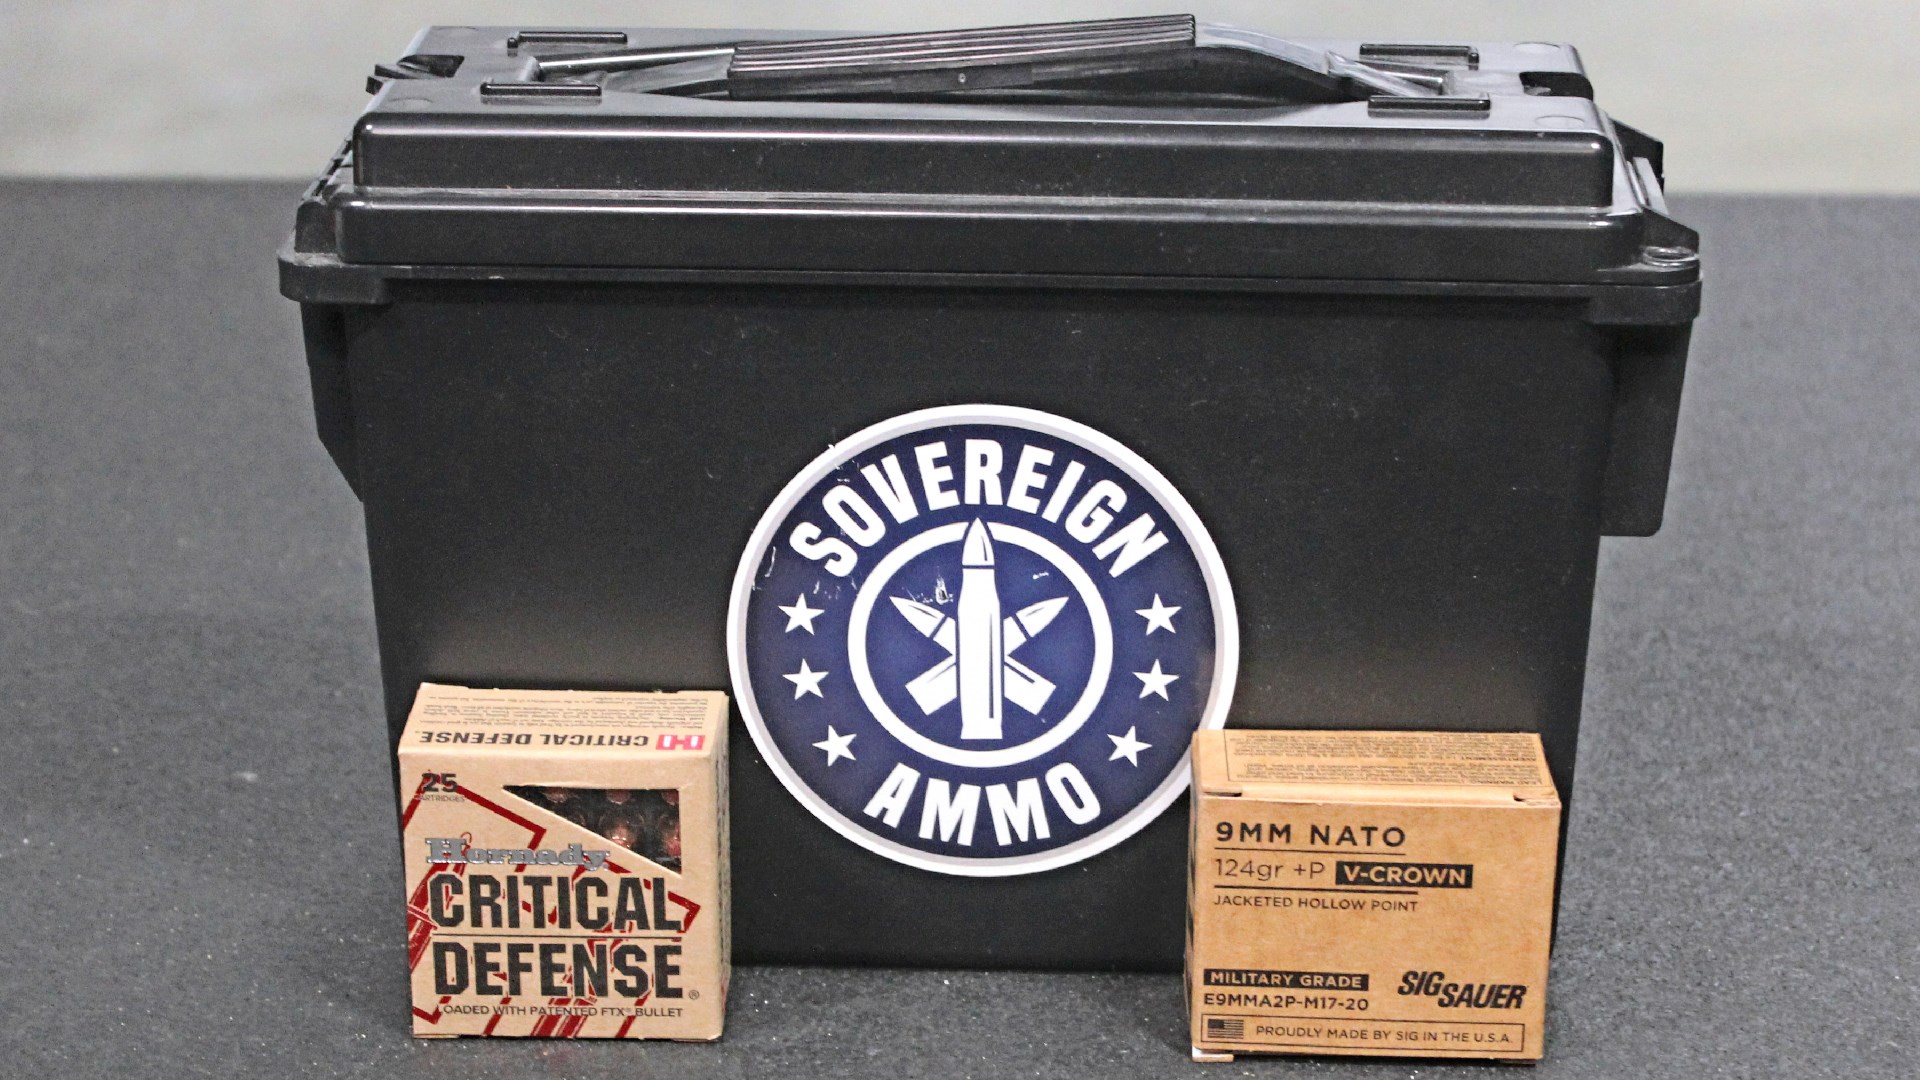 Ammunition boxes can ammo